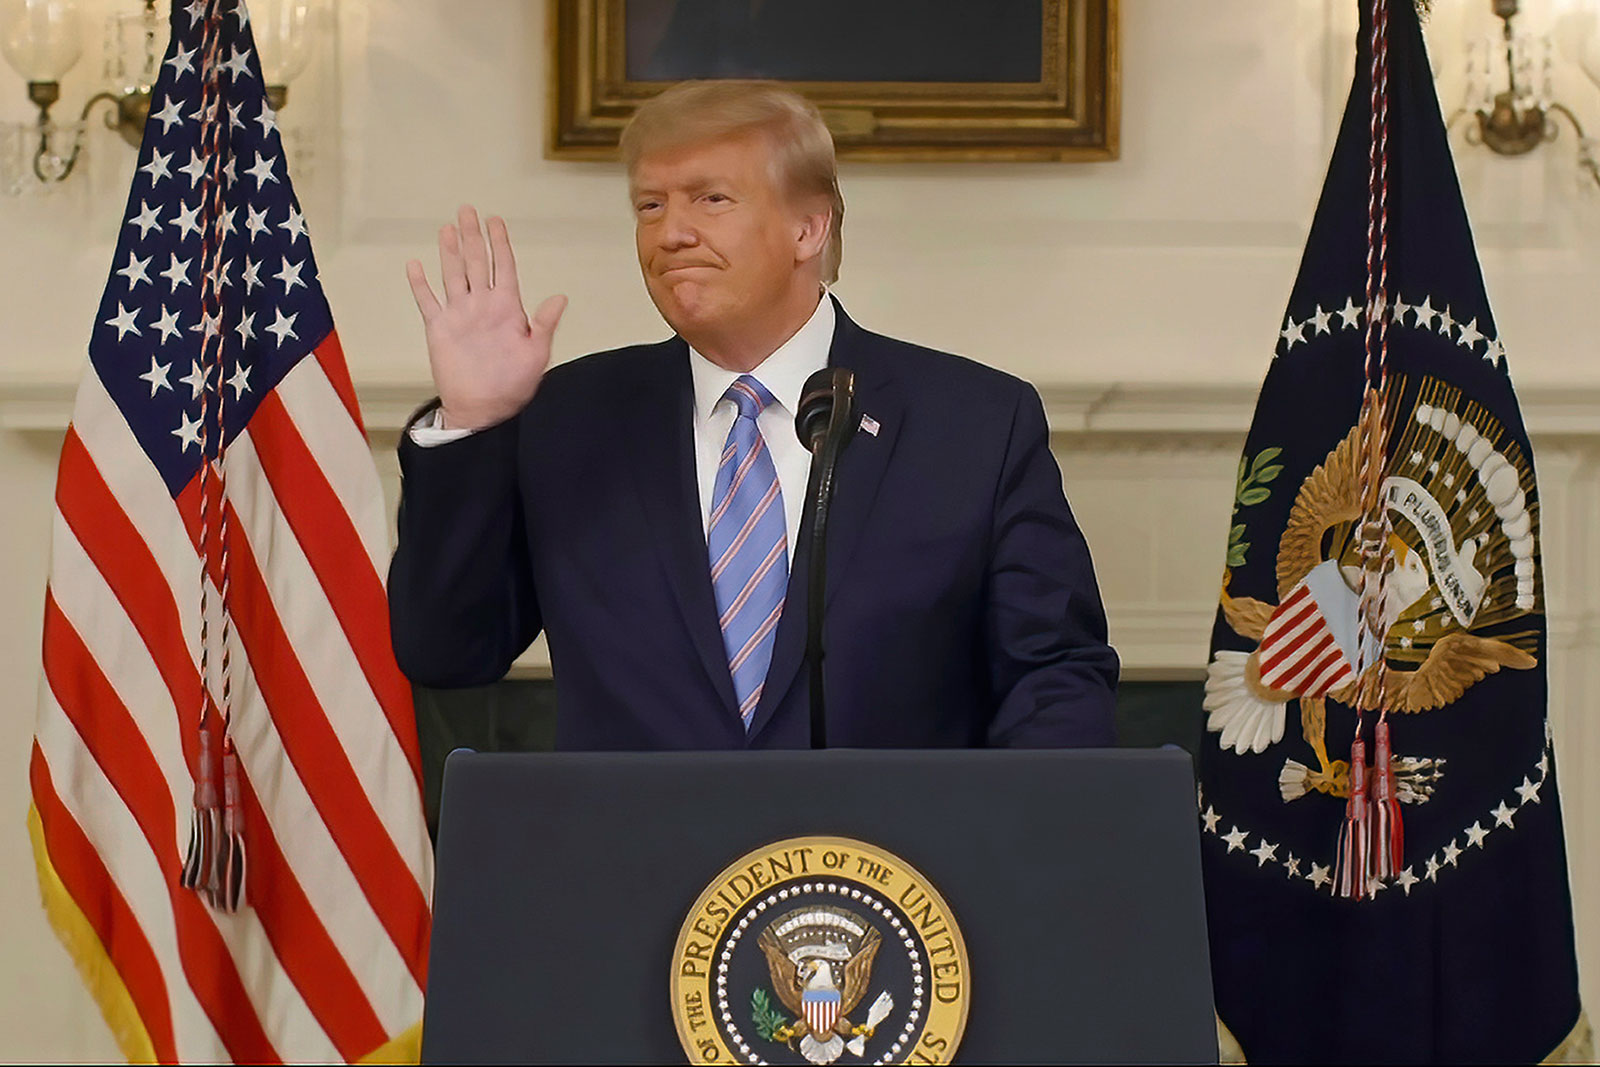 Video released by the House select committee shows former President Donald Trump recording a video statement at the White House on January 7, 2021.